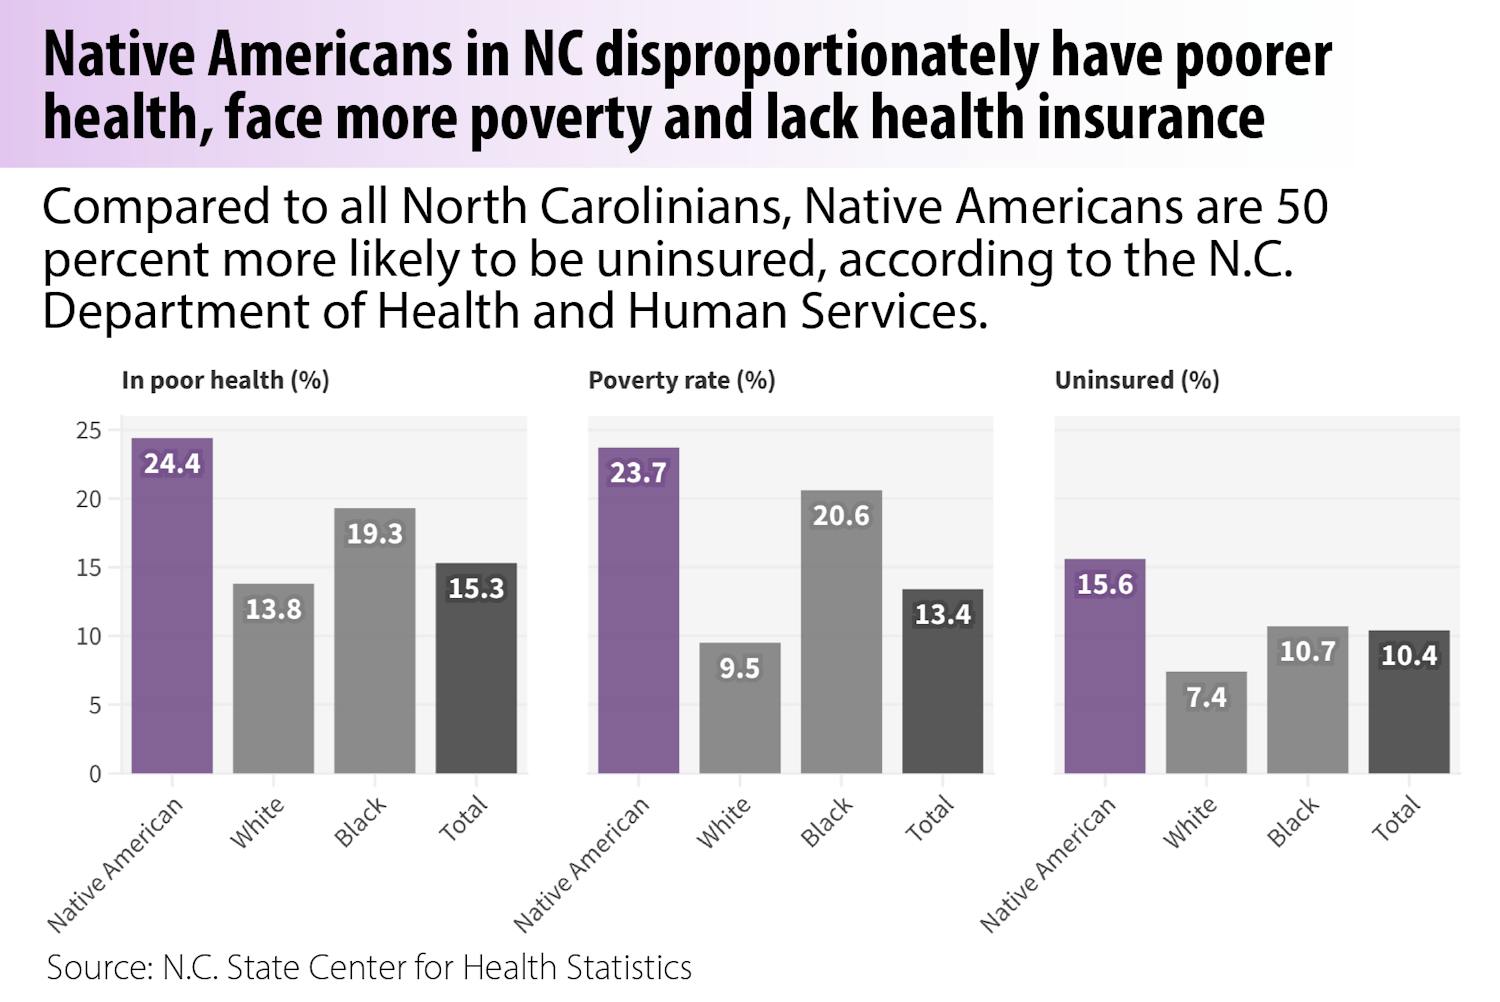 Visualization: Native Americans in NC disproportionately have poorer health, face more poverty and lack health insurance